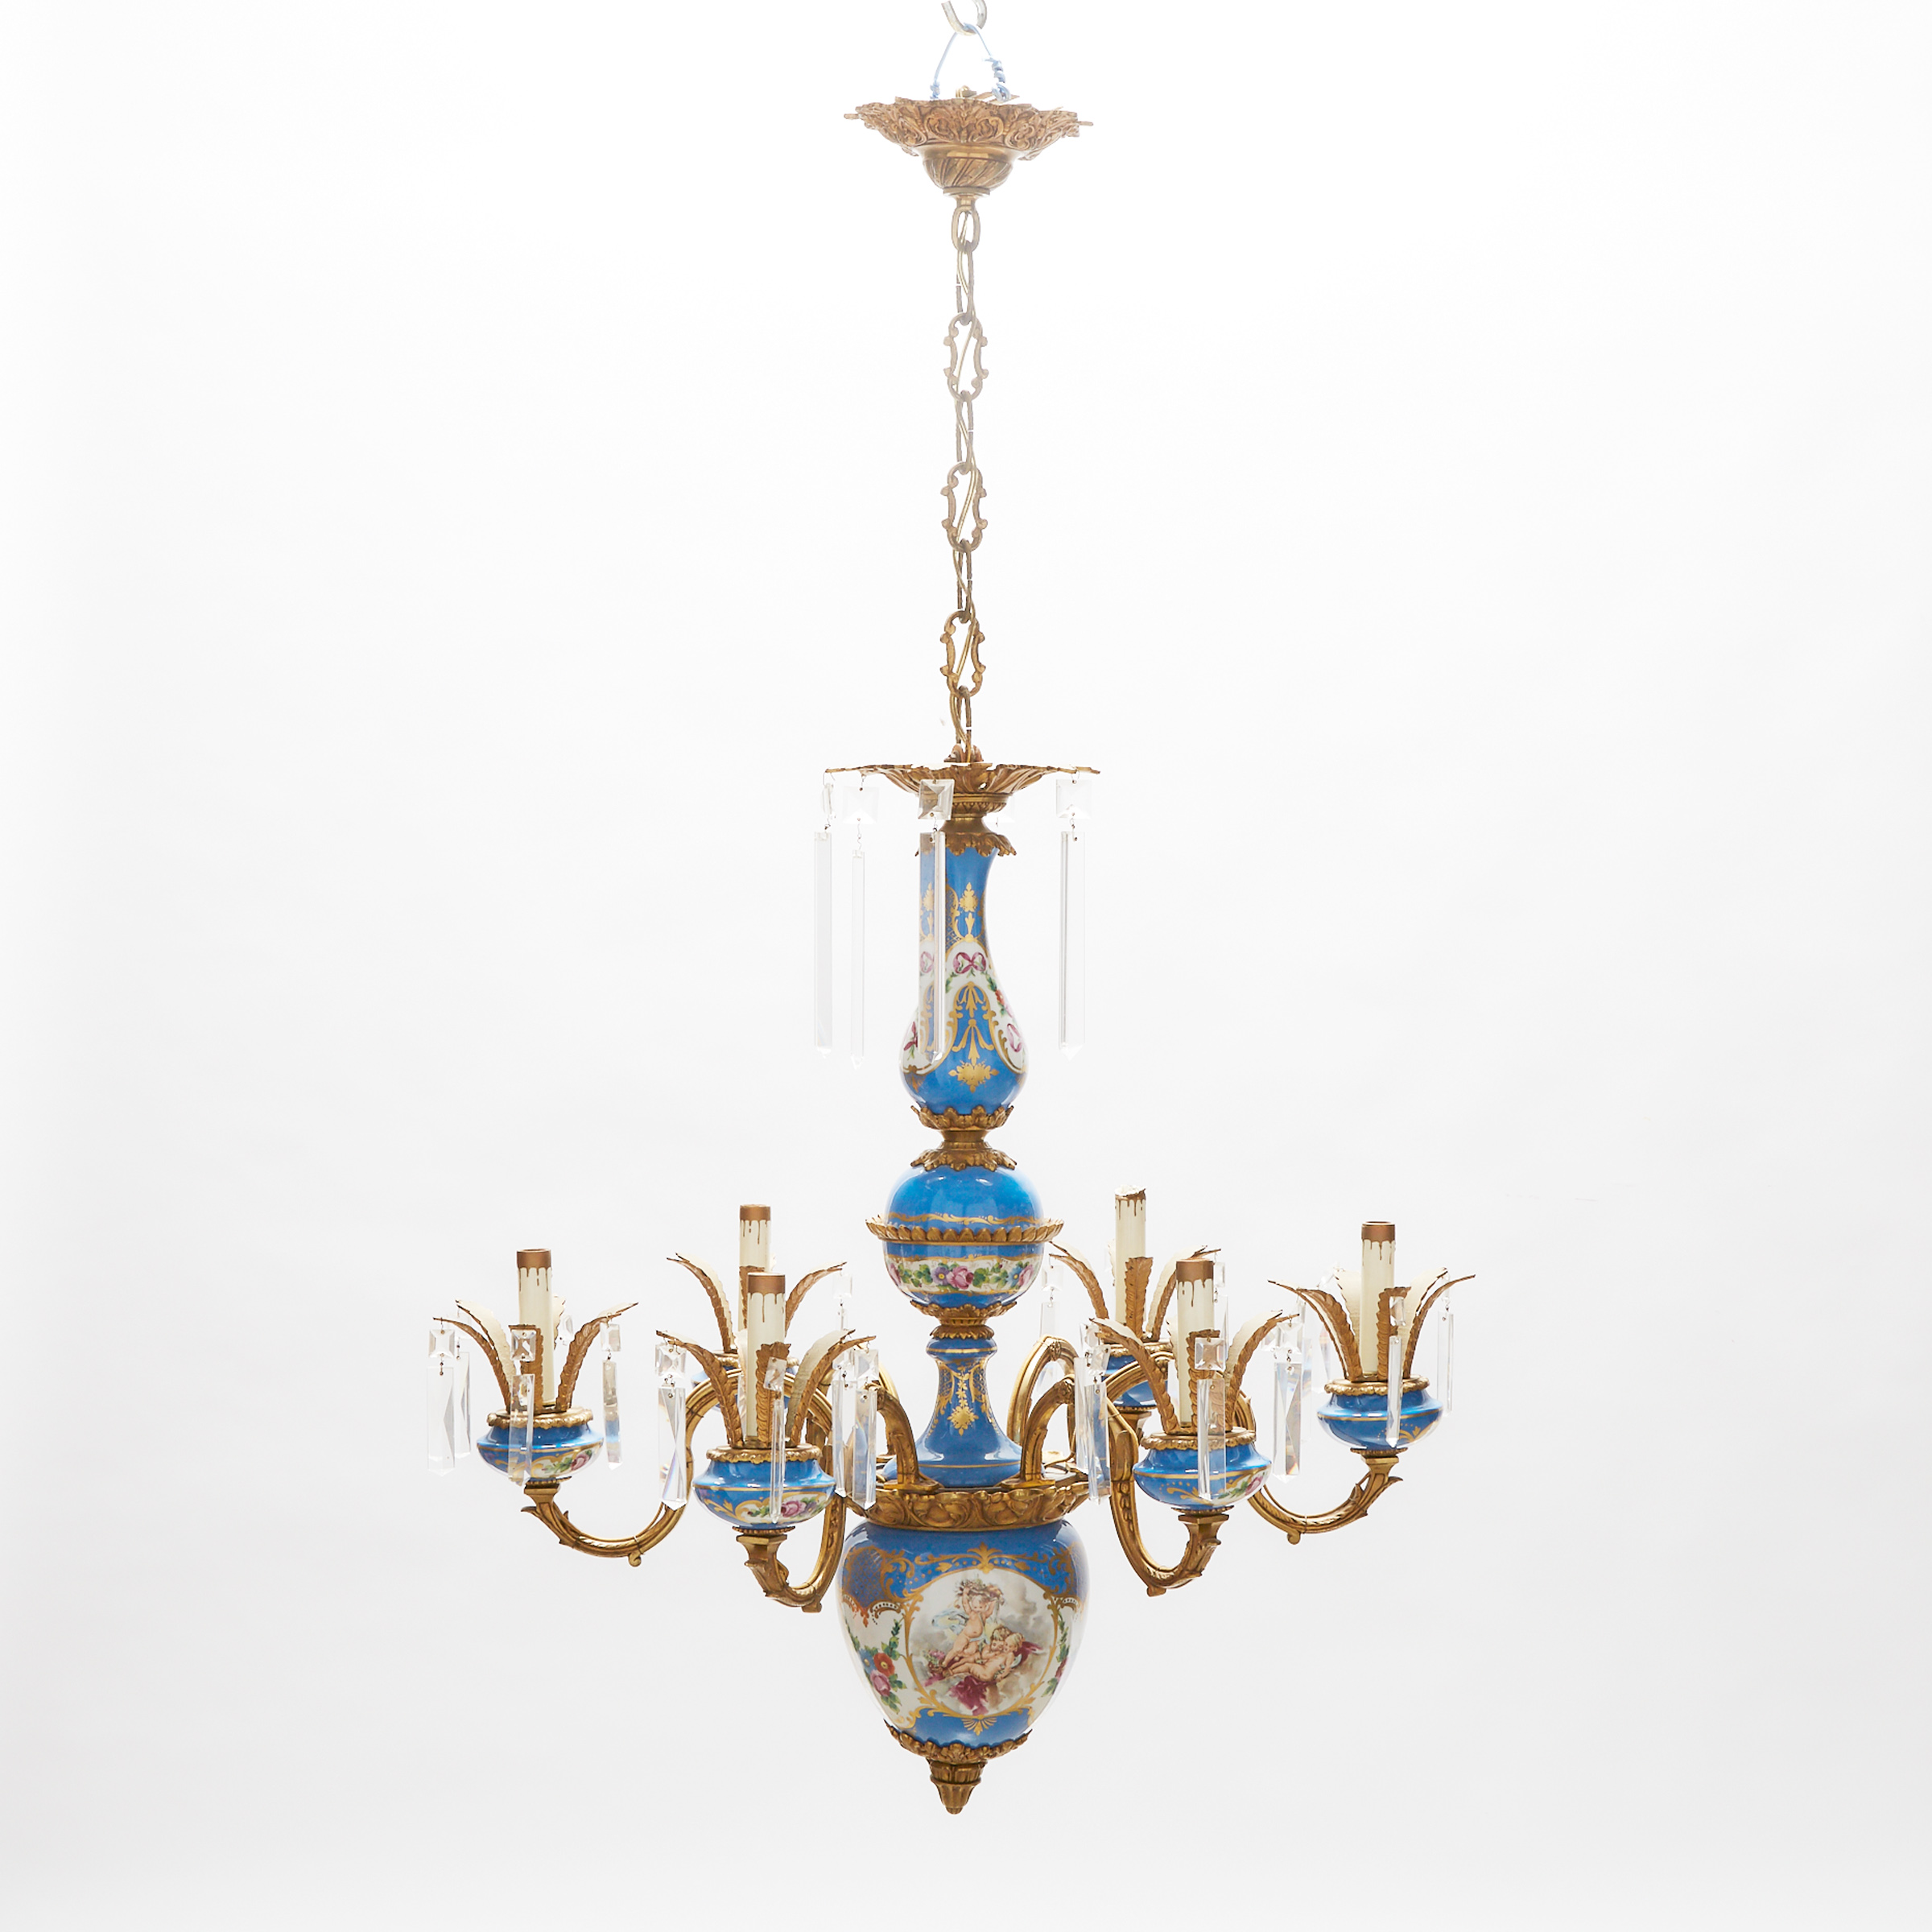 French Sevres Porcelain Mounted Ormolu Six-Light Chandelier, 19th century